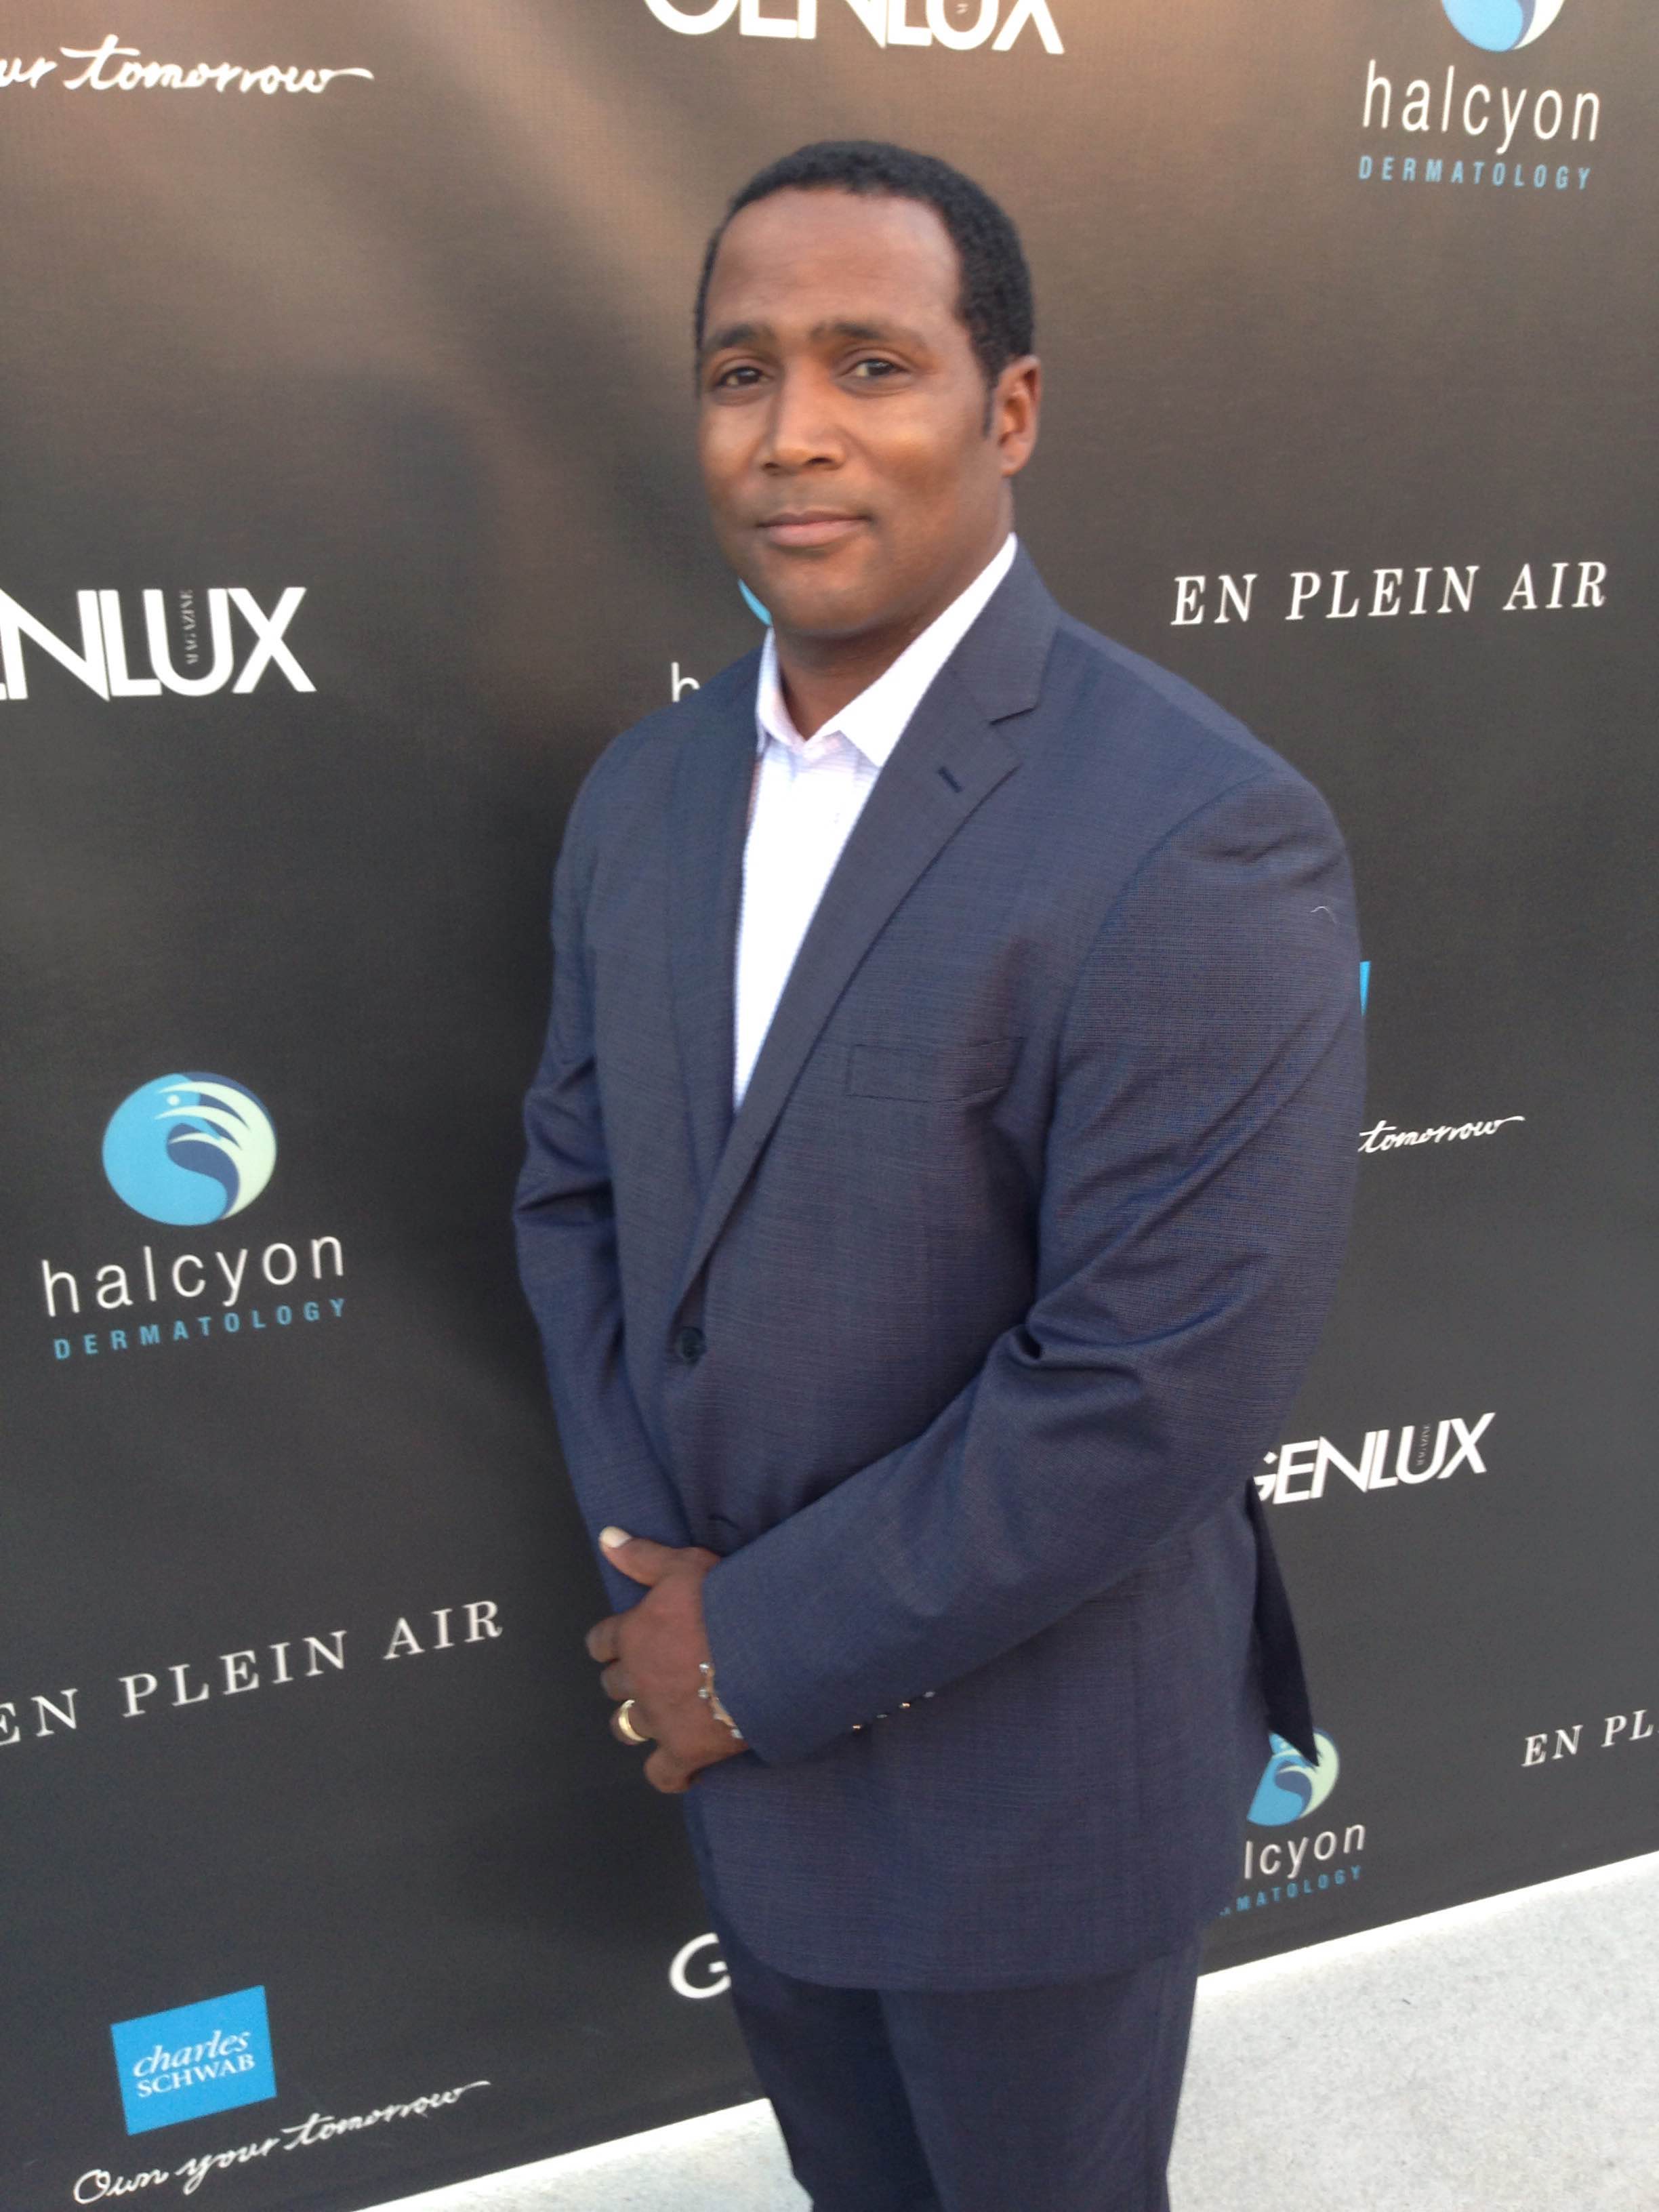 On the Red Carpet at Genlux Magazine Fashion Benefit and David Meister Runway Show